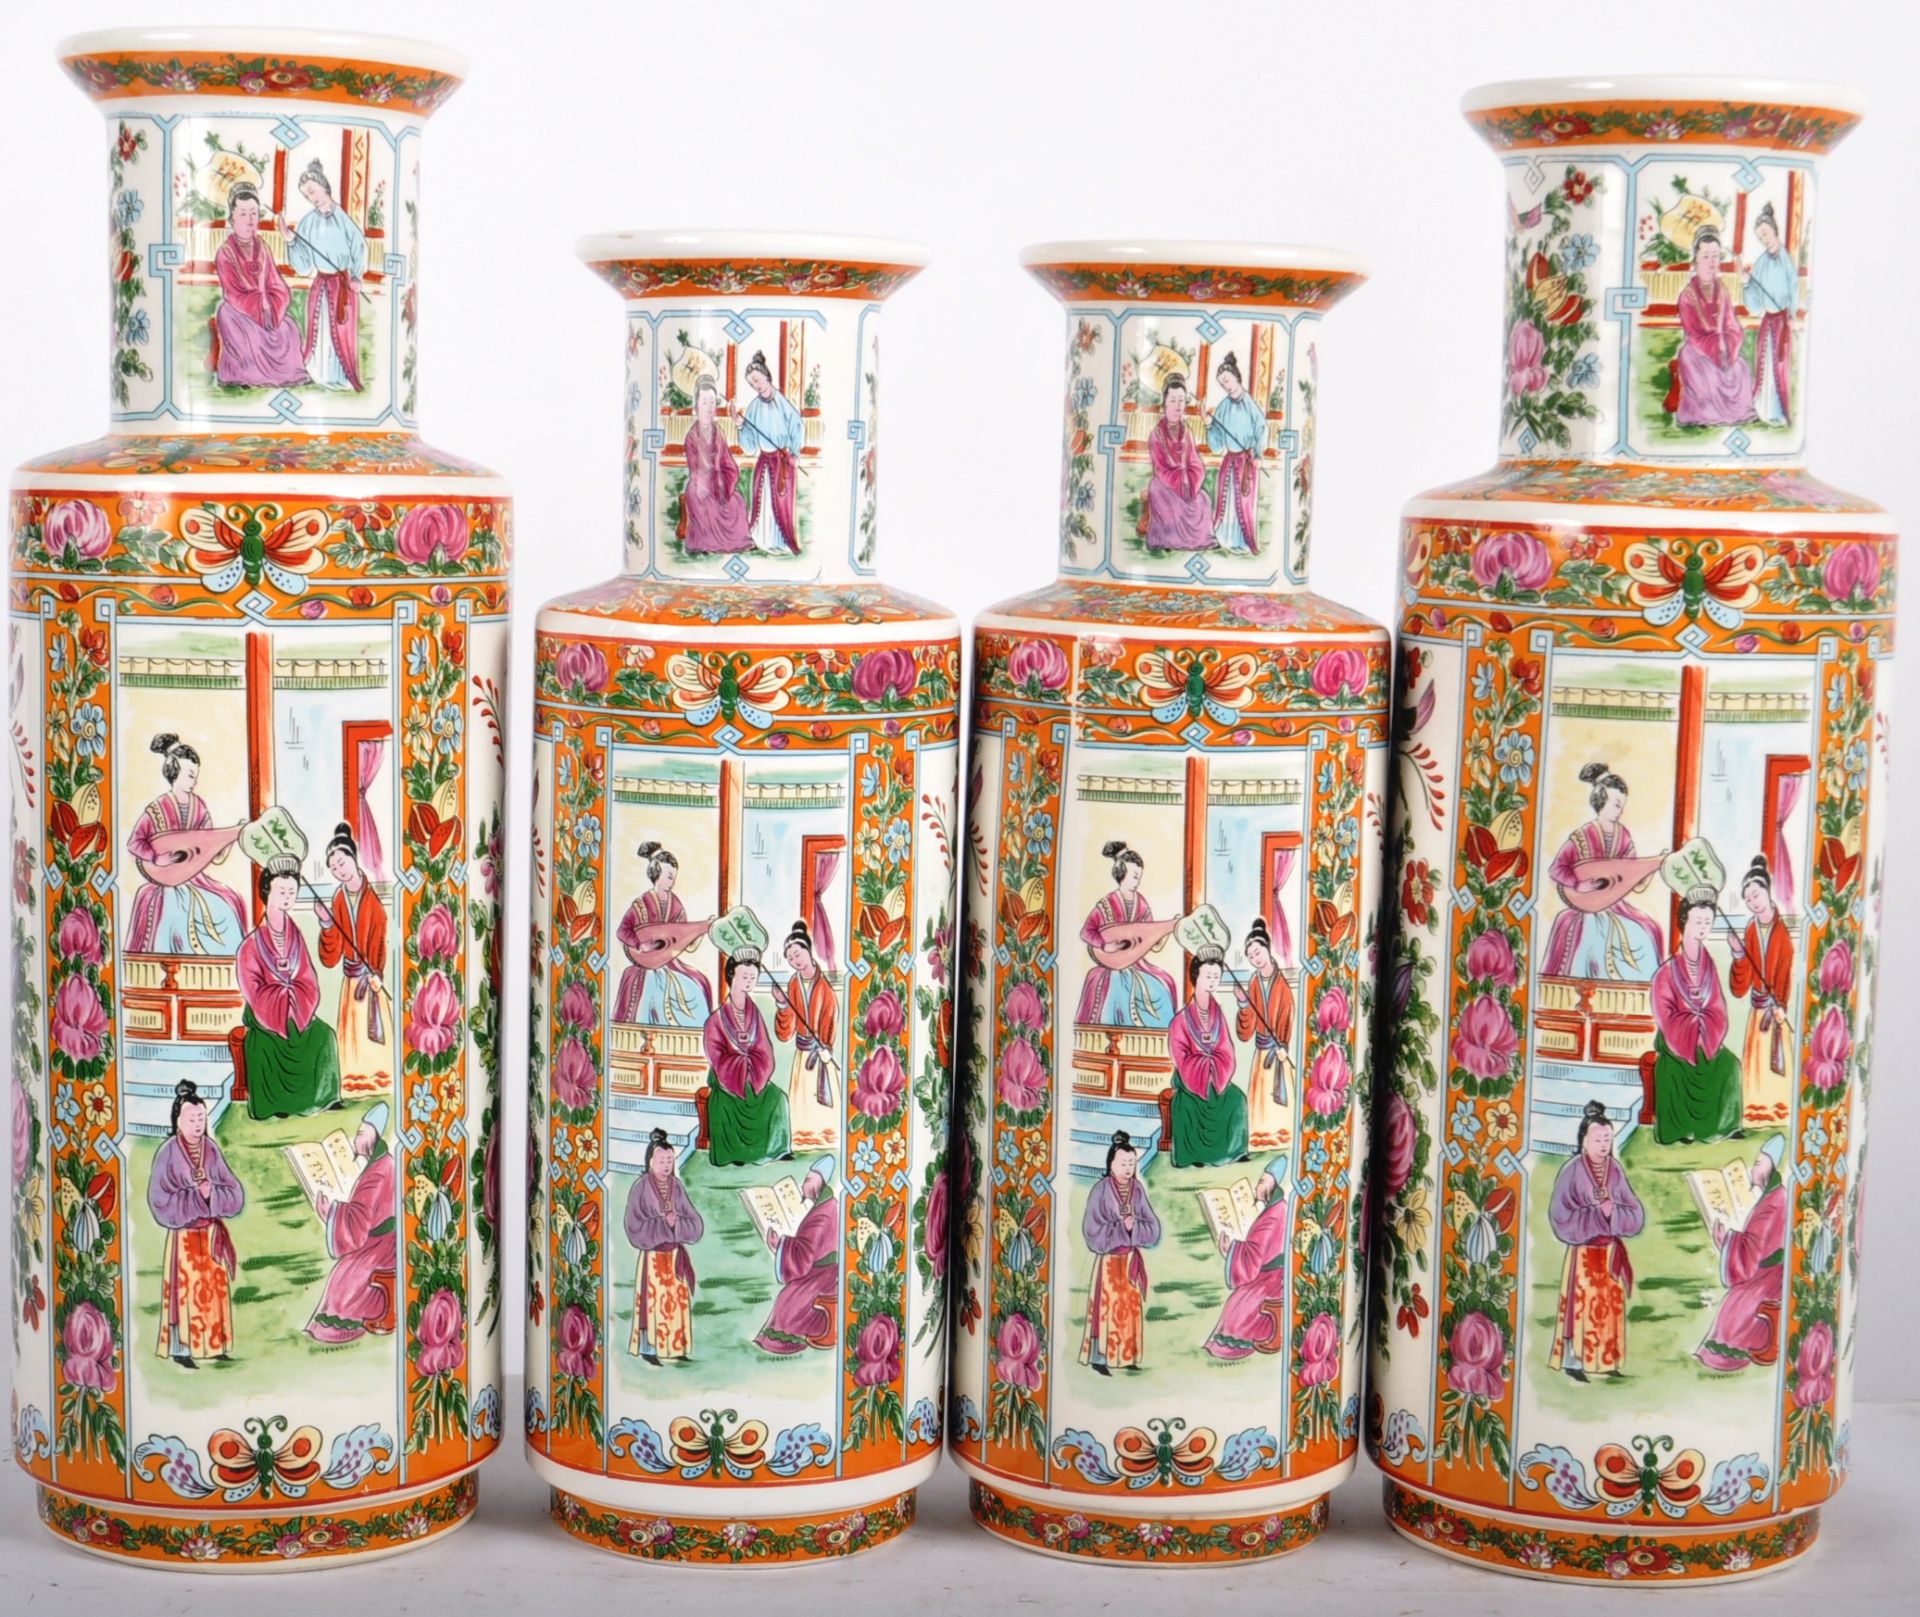 MATCHING SET OF FOUR CHINESE FAMILLE ROSE VASES - Image 2 of 11